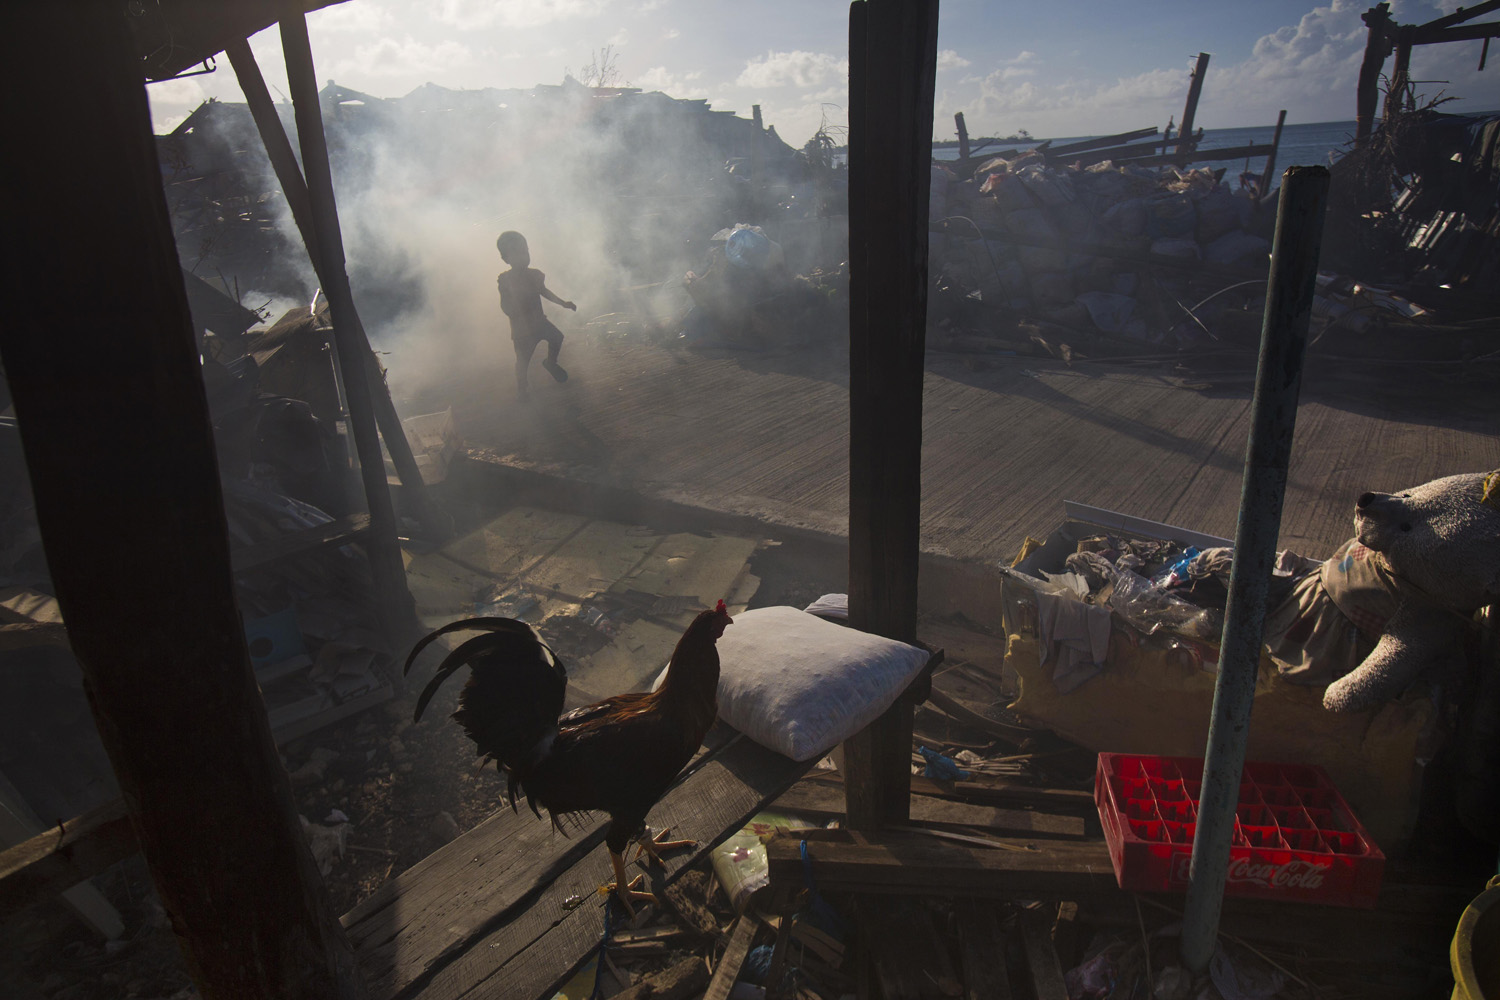 Nov. 15, 2013. A boy runs through the smoke of a cooking fire in the typhoon-shattered town of Guiuan, Philippines.